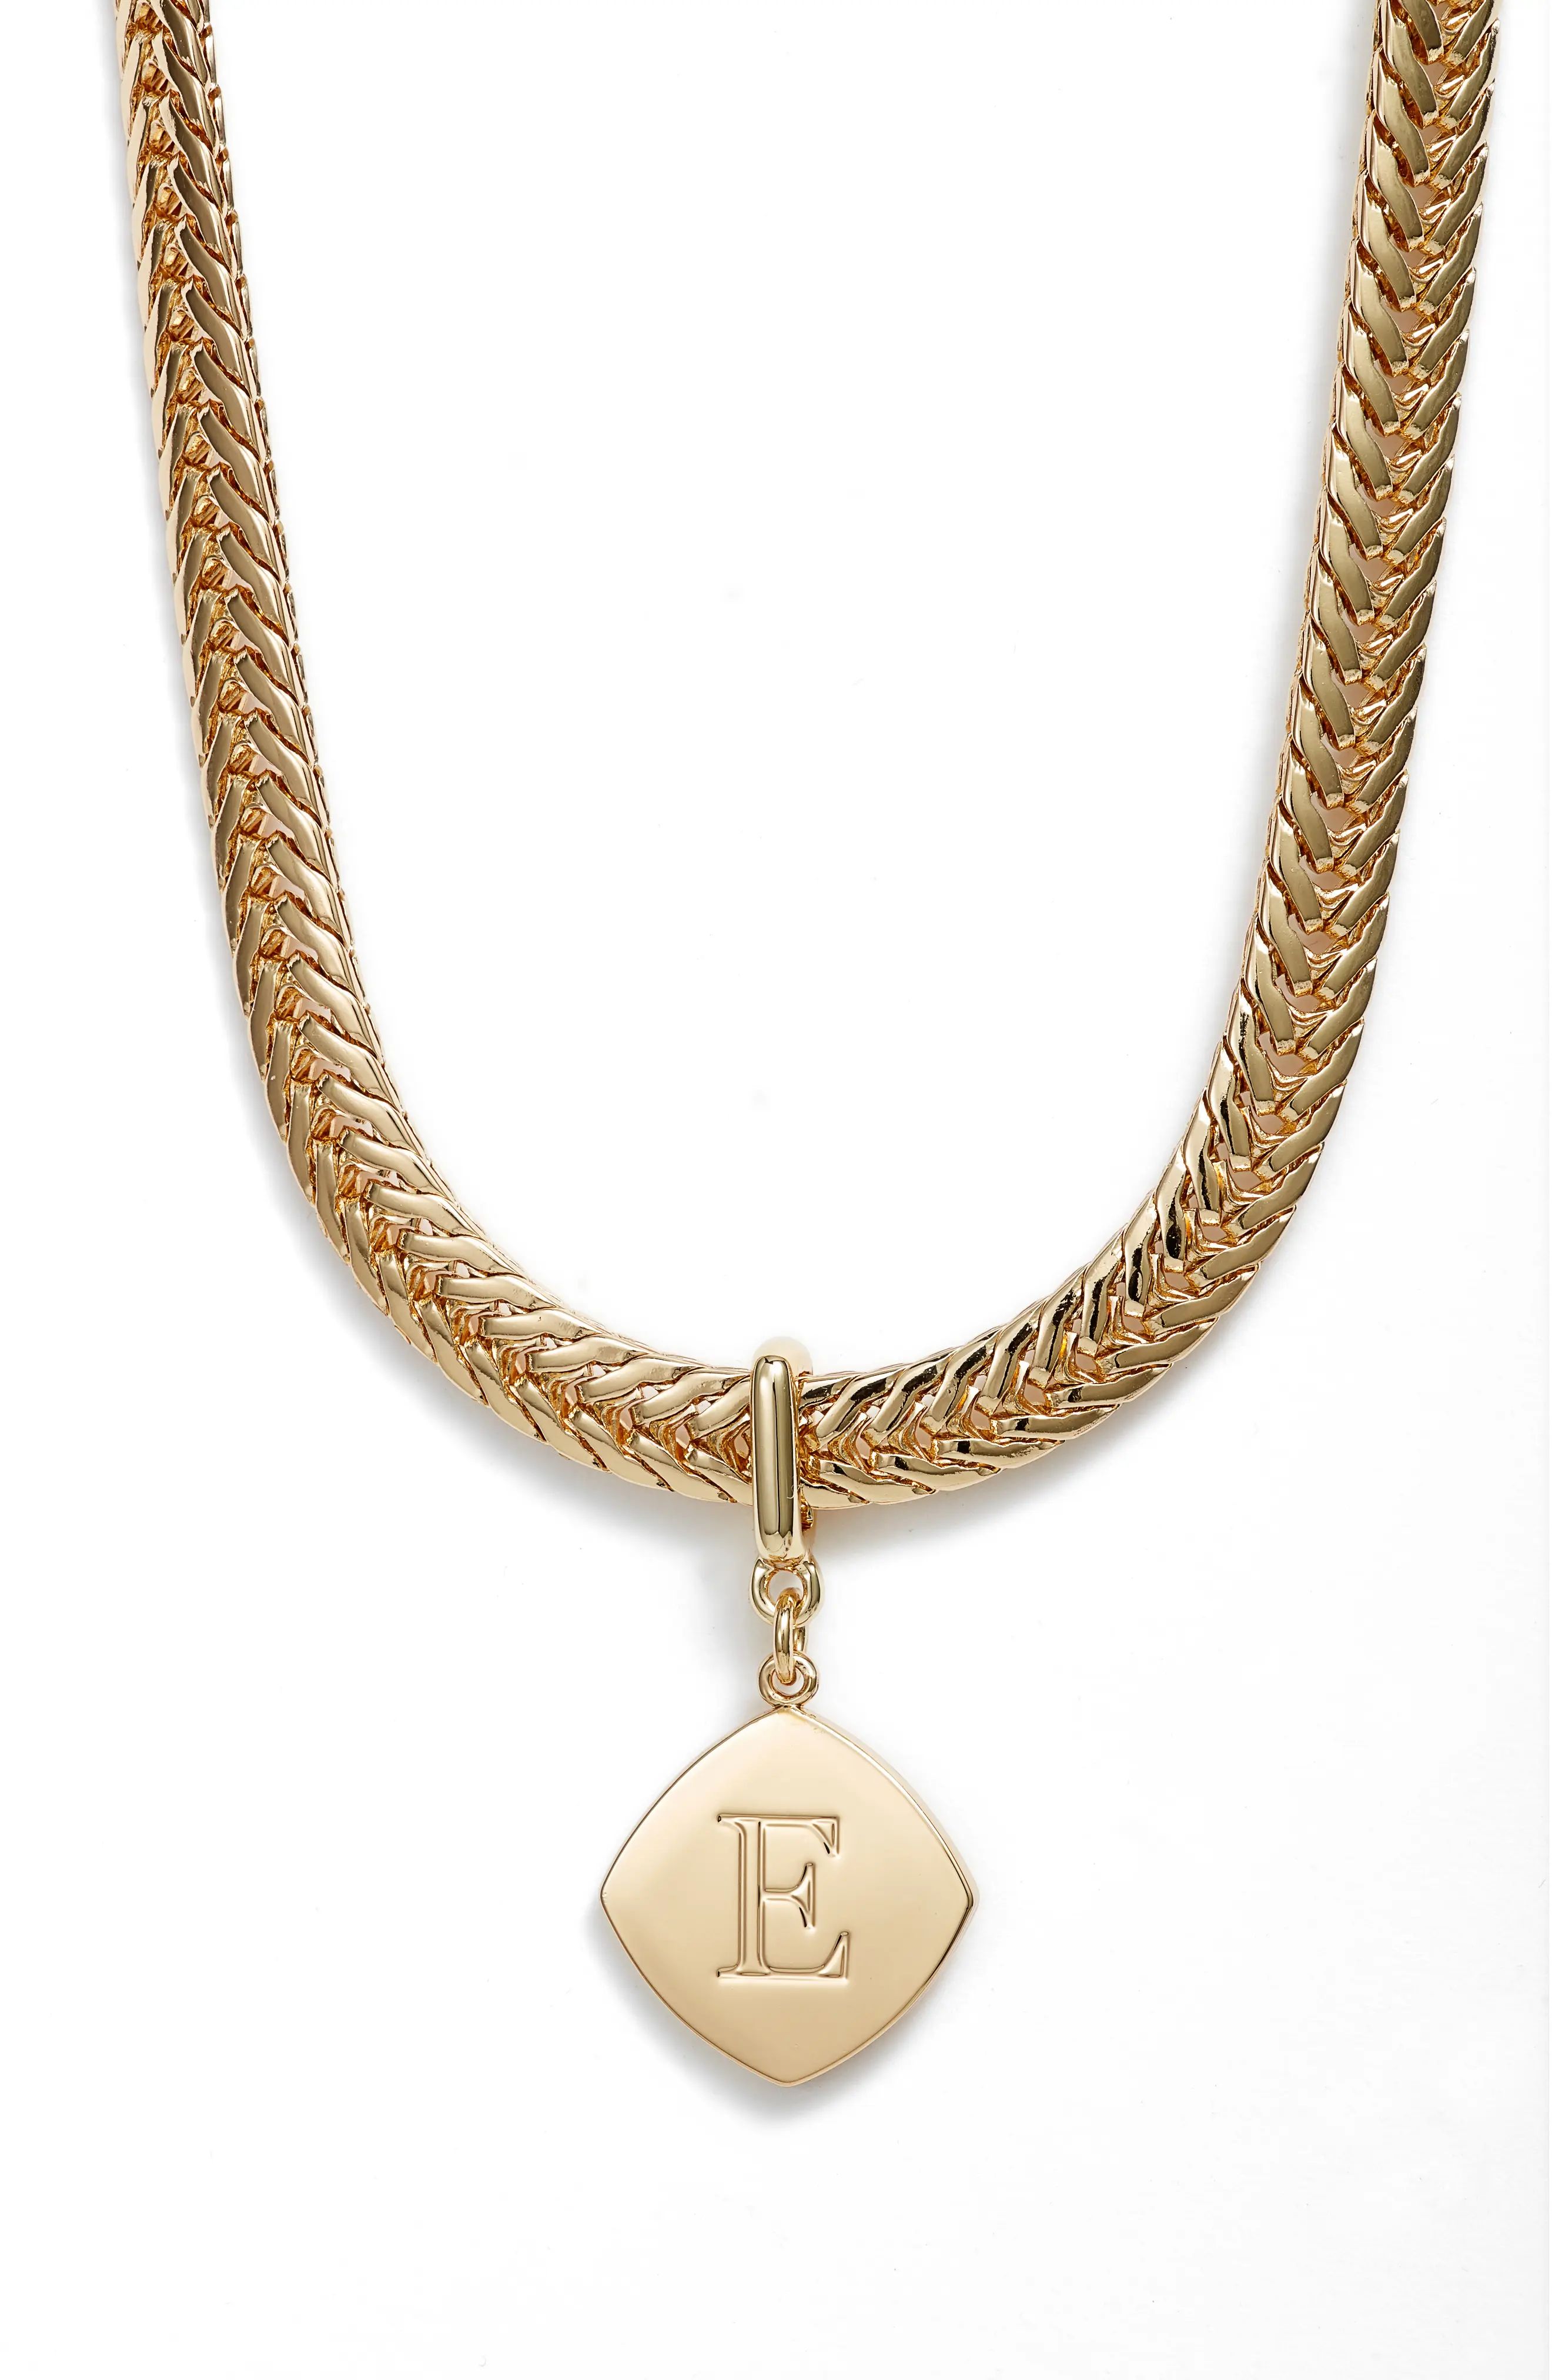 Nordstrom Initial Pendant Necklace in Gold- E at Nordstrom | Nordstrom